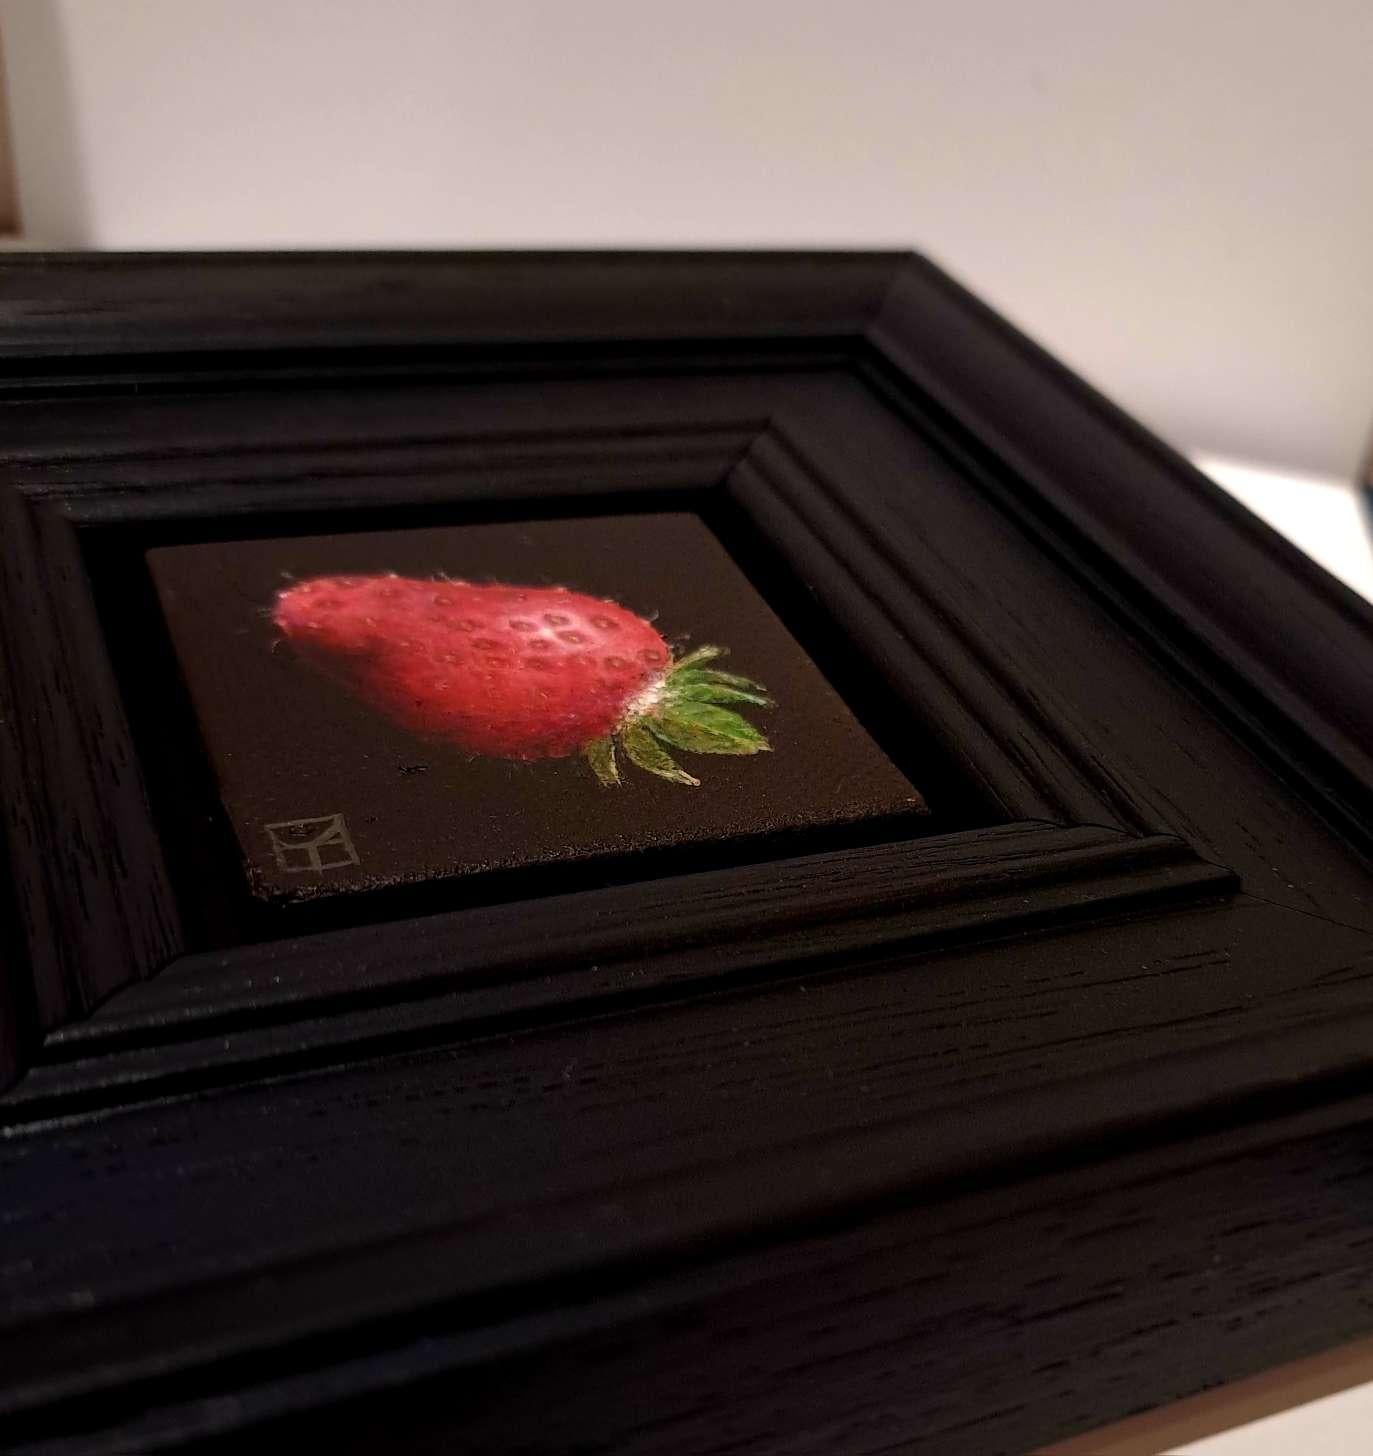 Pocket Very Ripe Strawberry, Original Painting, Still Life, Red, Black For Sale 4